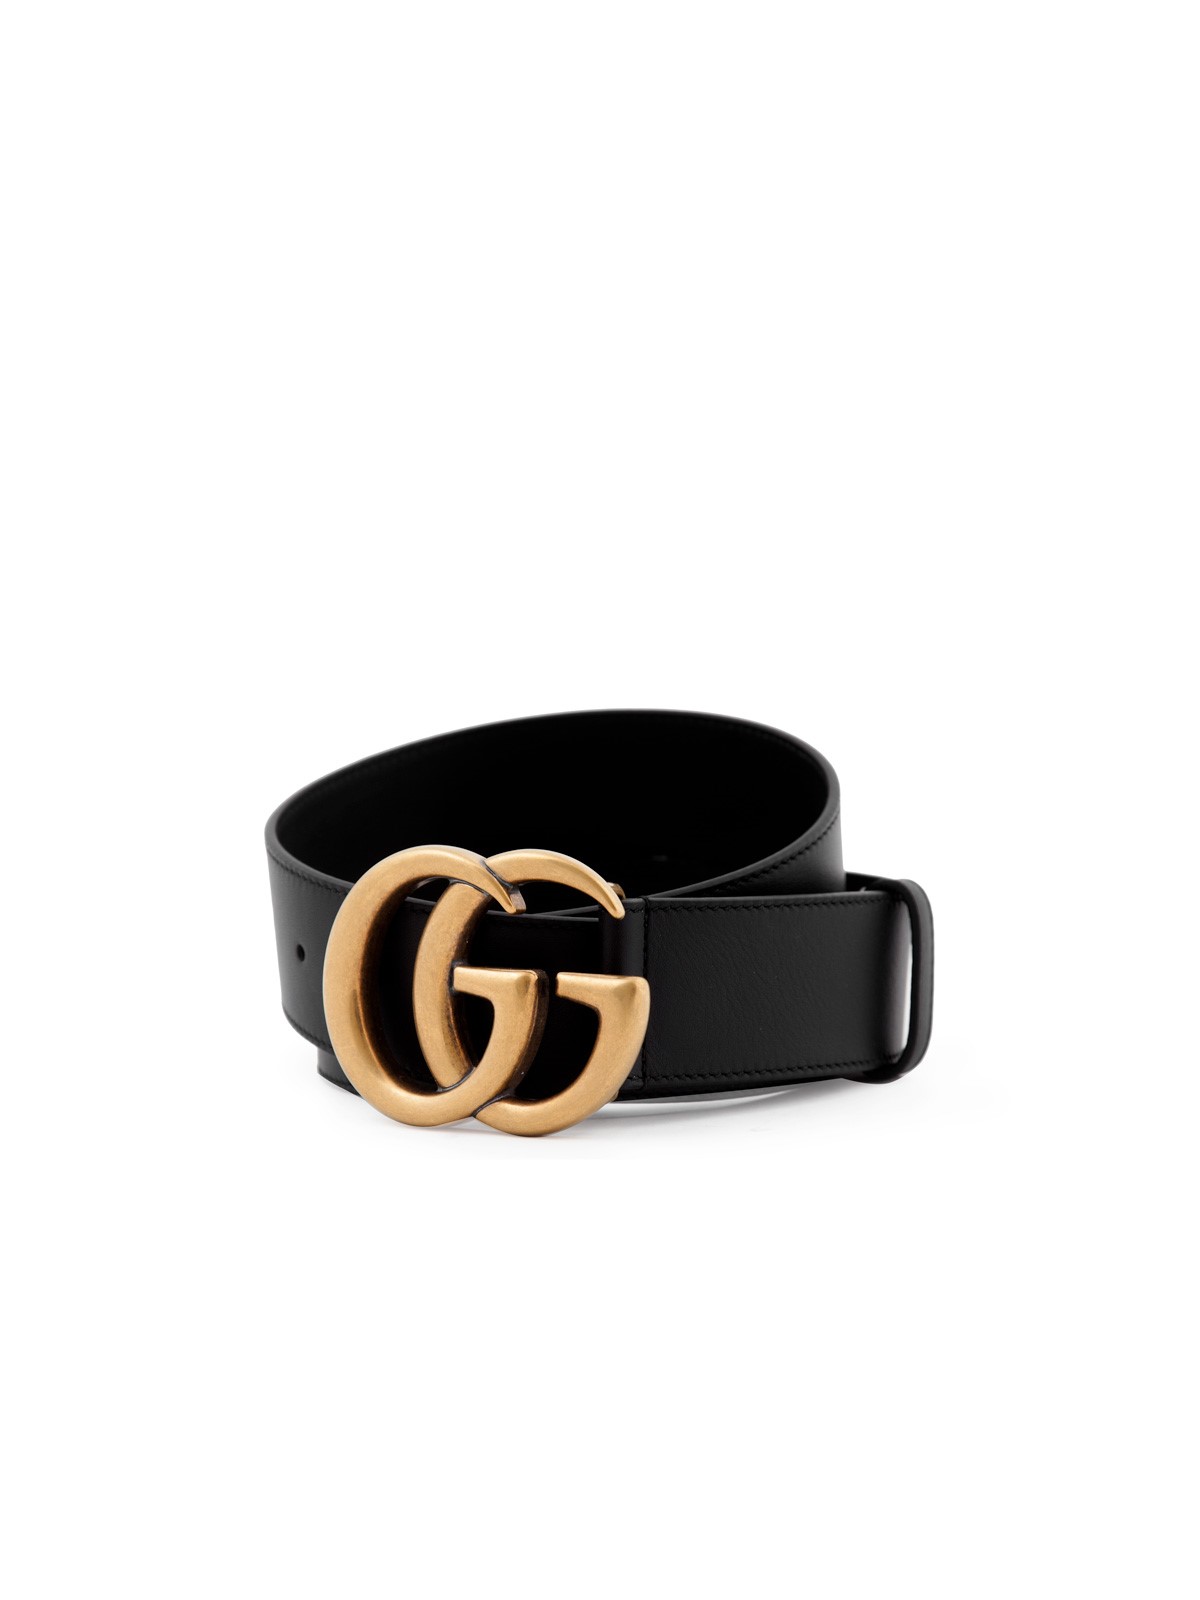 400593 gucci belt,Save up to 19%,www.ilcascinone.com